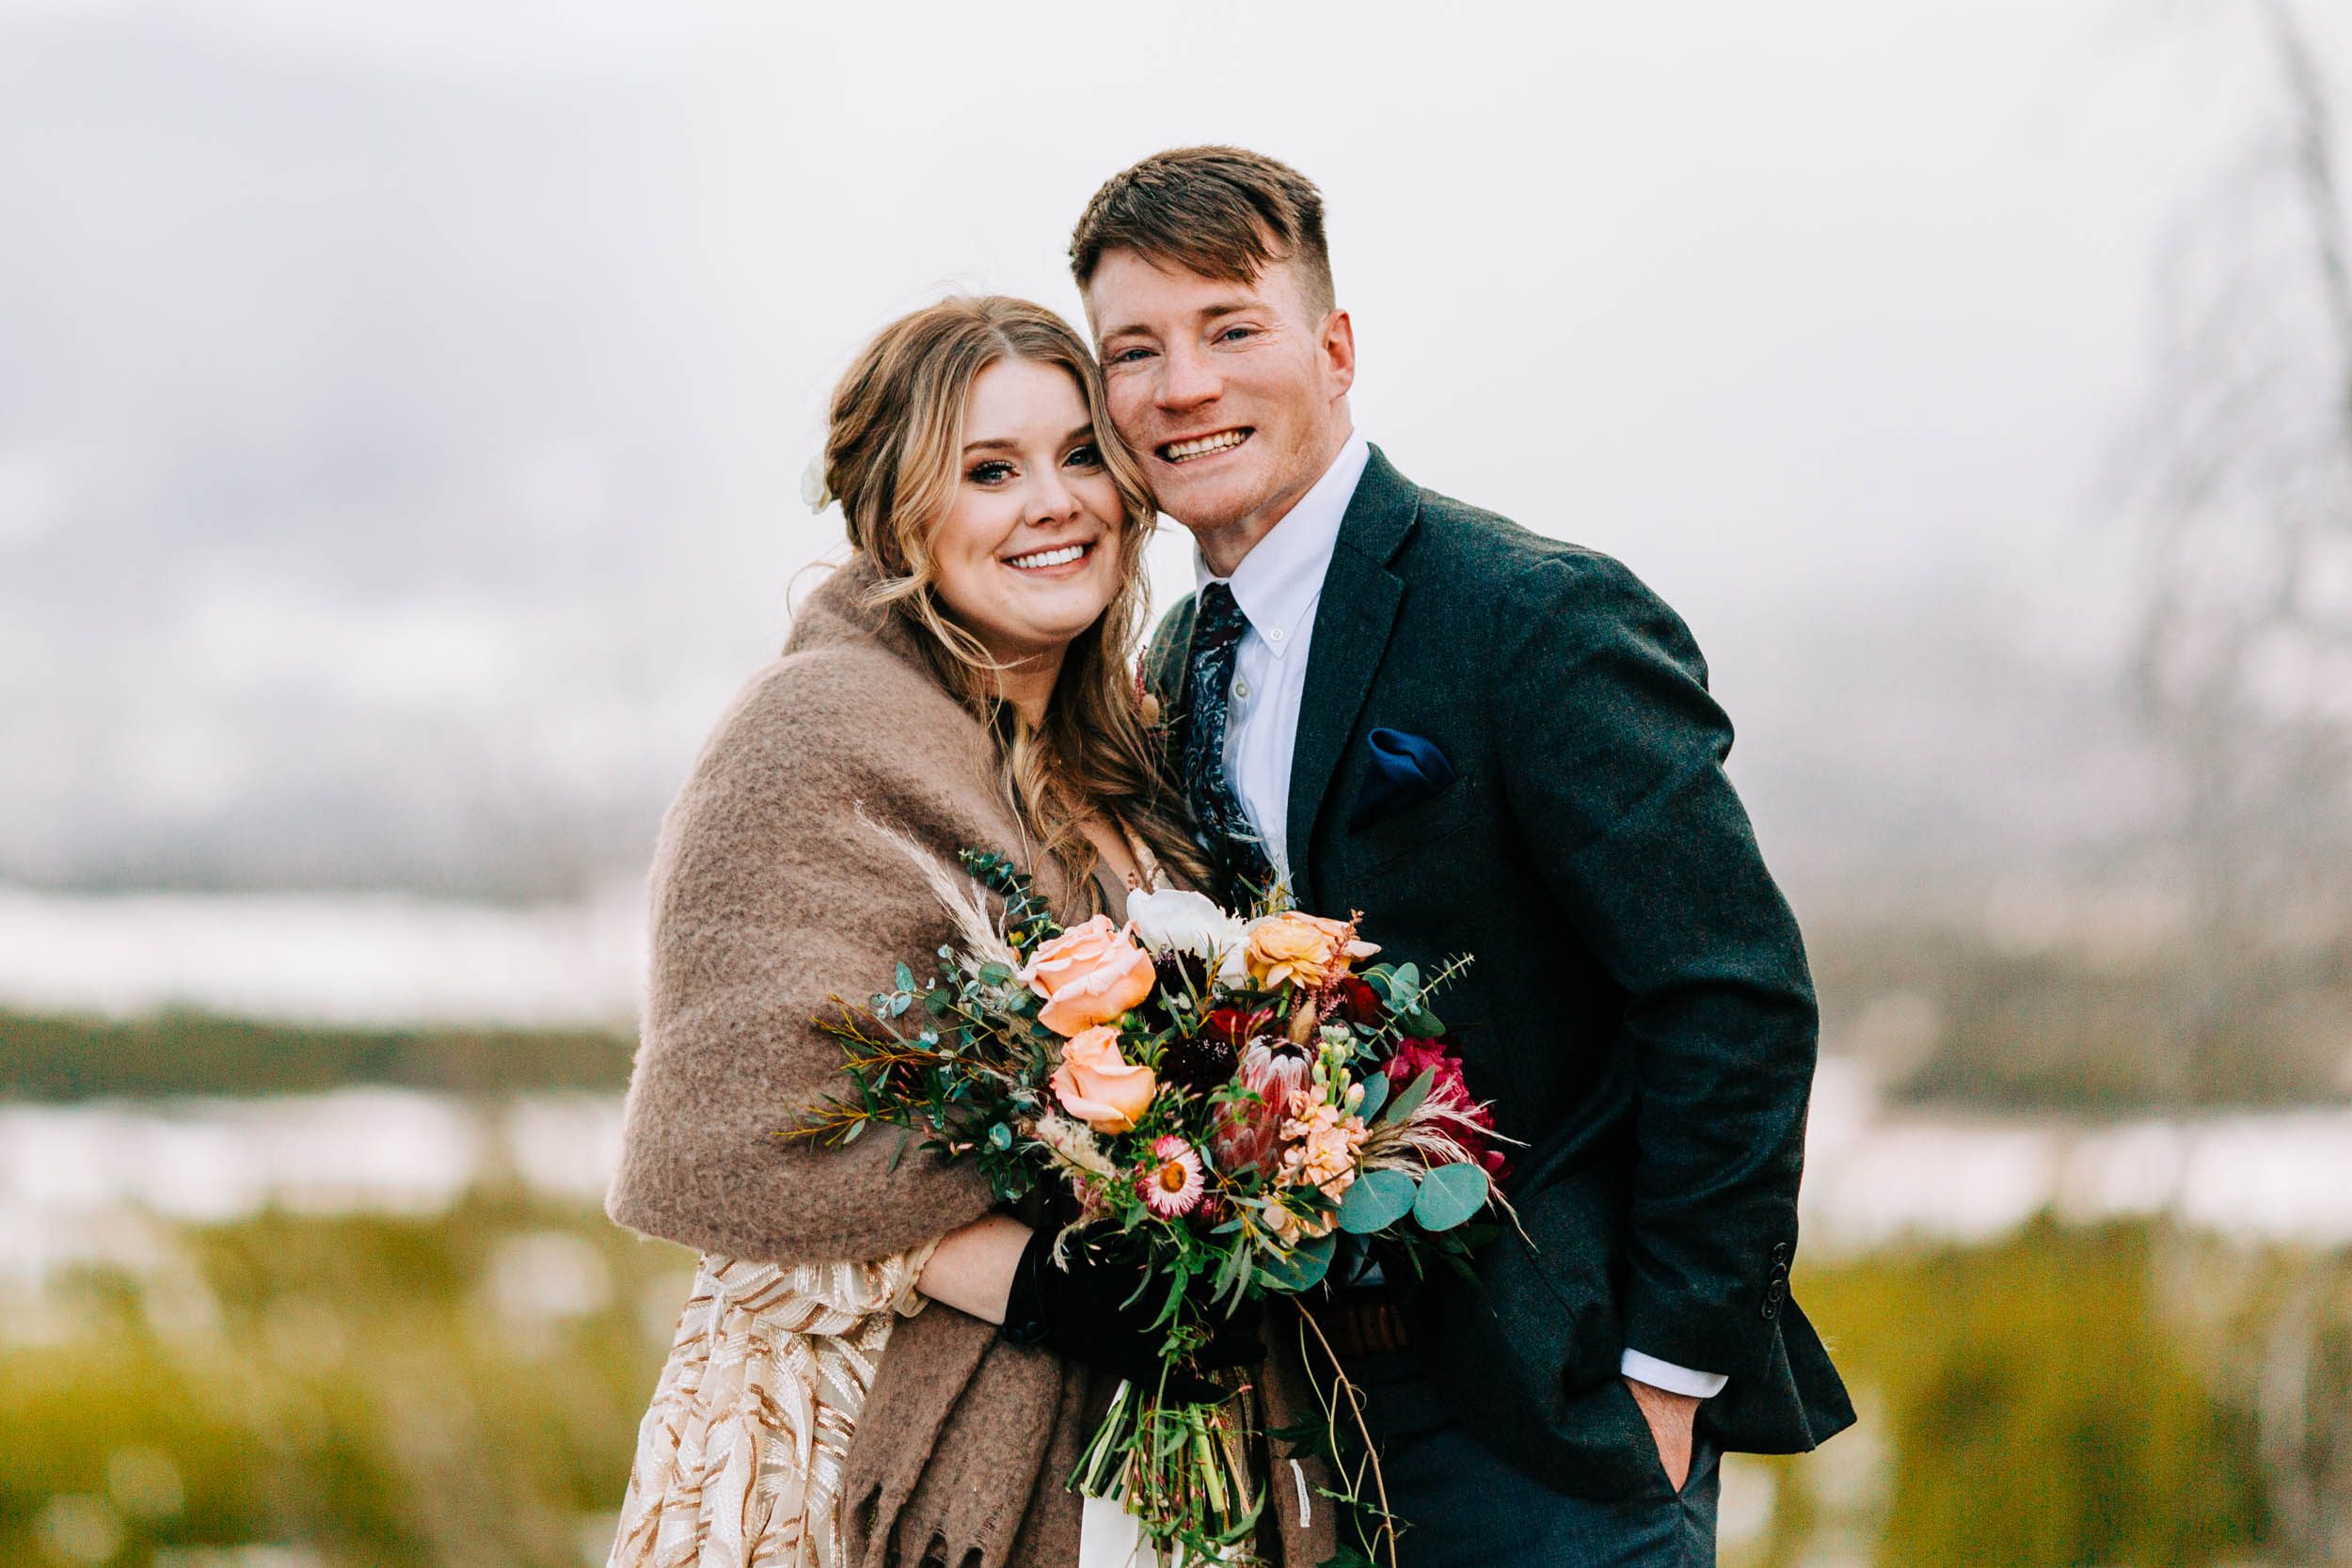 Destination elopement in the mountains